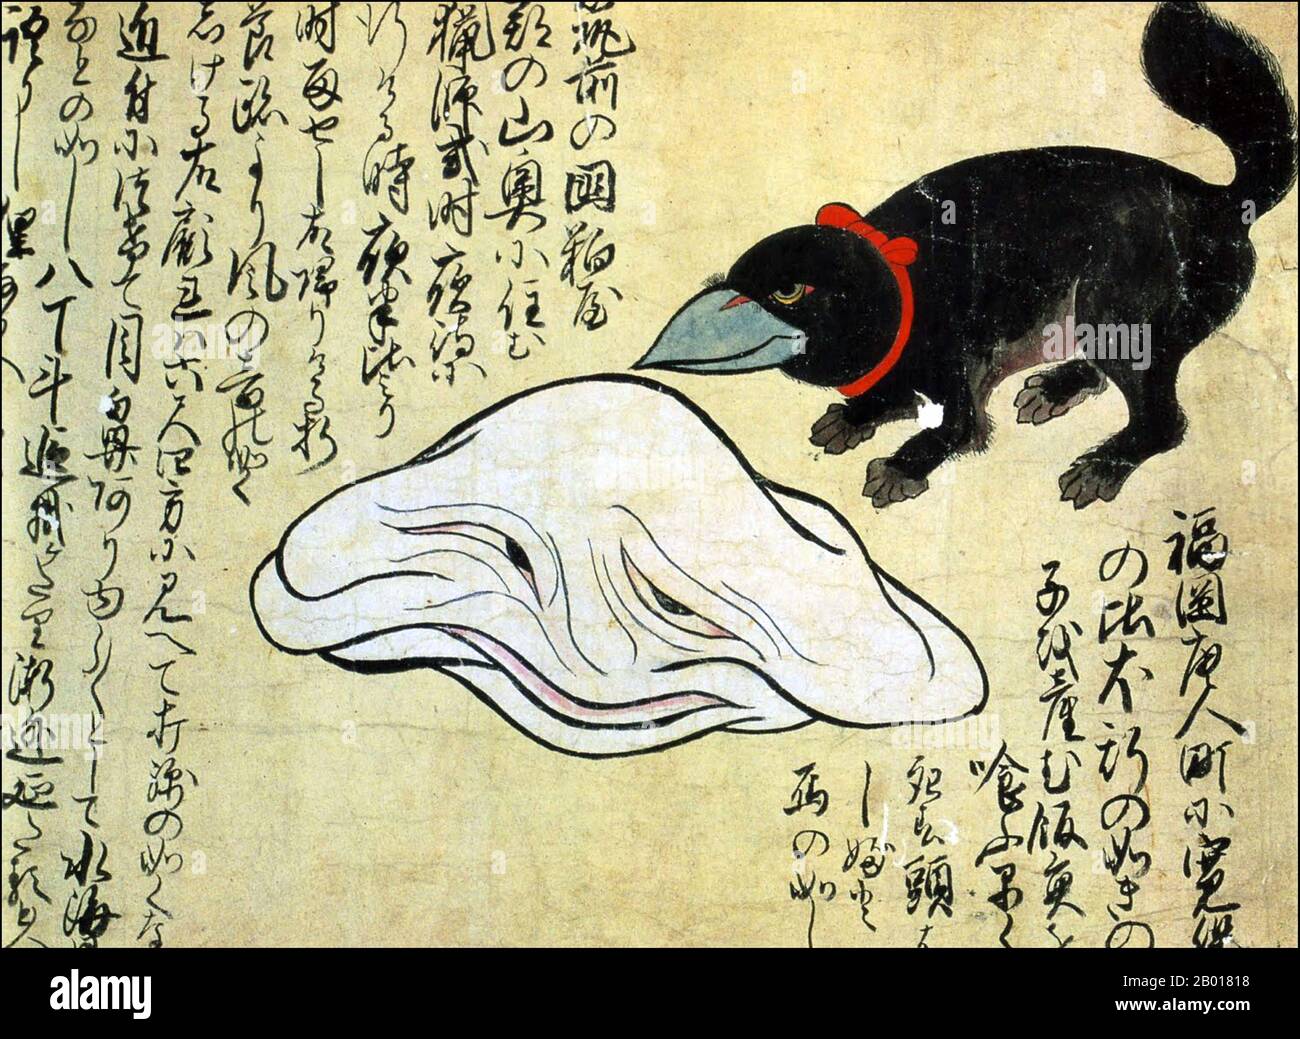 Japan: A white monster and a bird-dog hybrid monster. From the Kaikidan Ekotoba Monster Scroll, mid-19th century.  The black creature on the right was born by a dog that mated with a bird in the city of Fukuoka in the early 1740s. Next to the bird-dog hybrid is an amorphous white monster, also encountered in Fukuoka, which is said to have measured about 180 centimetres (6 ft) across. People at the time believed this creature was a Tanuki (Japanese raccoon dog) that had shape-shifted.  The Kaikidan Ekotoba is a mid-19th century handscroll that profiles 33 legendary monsters and human oddities. Stock Photo